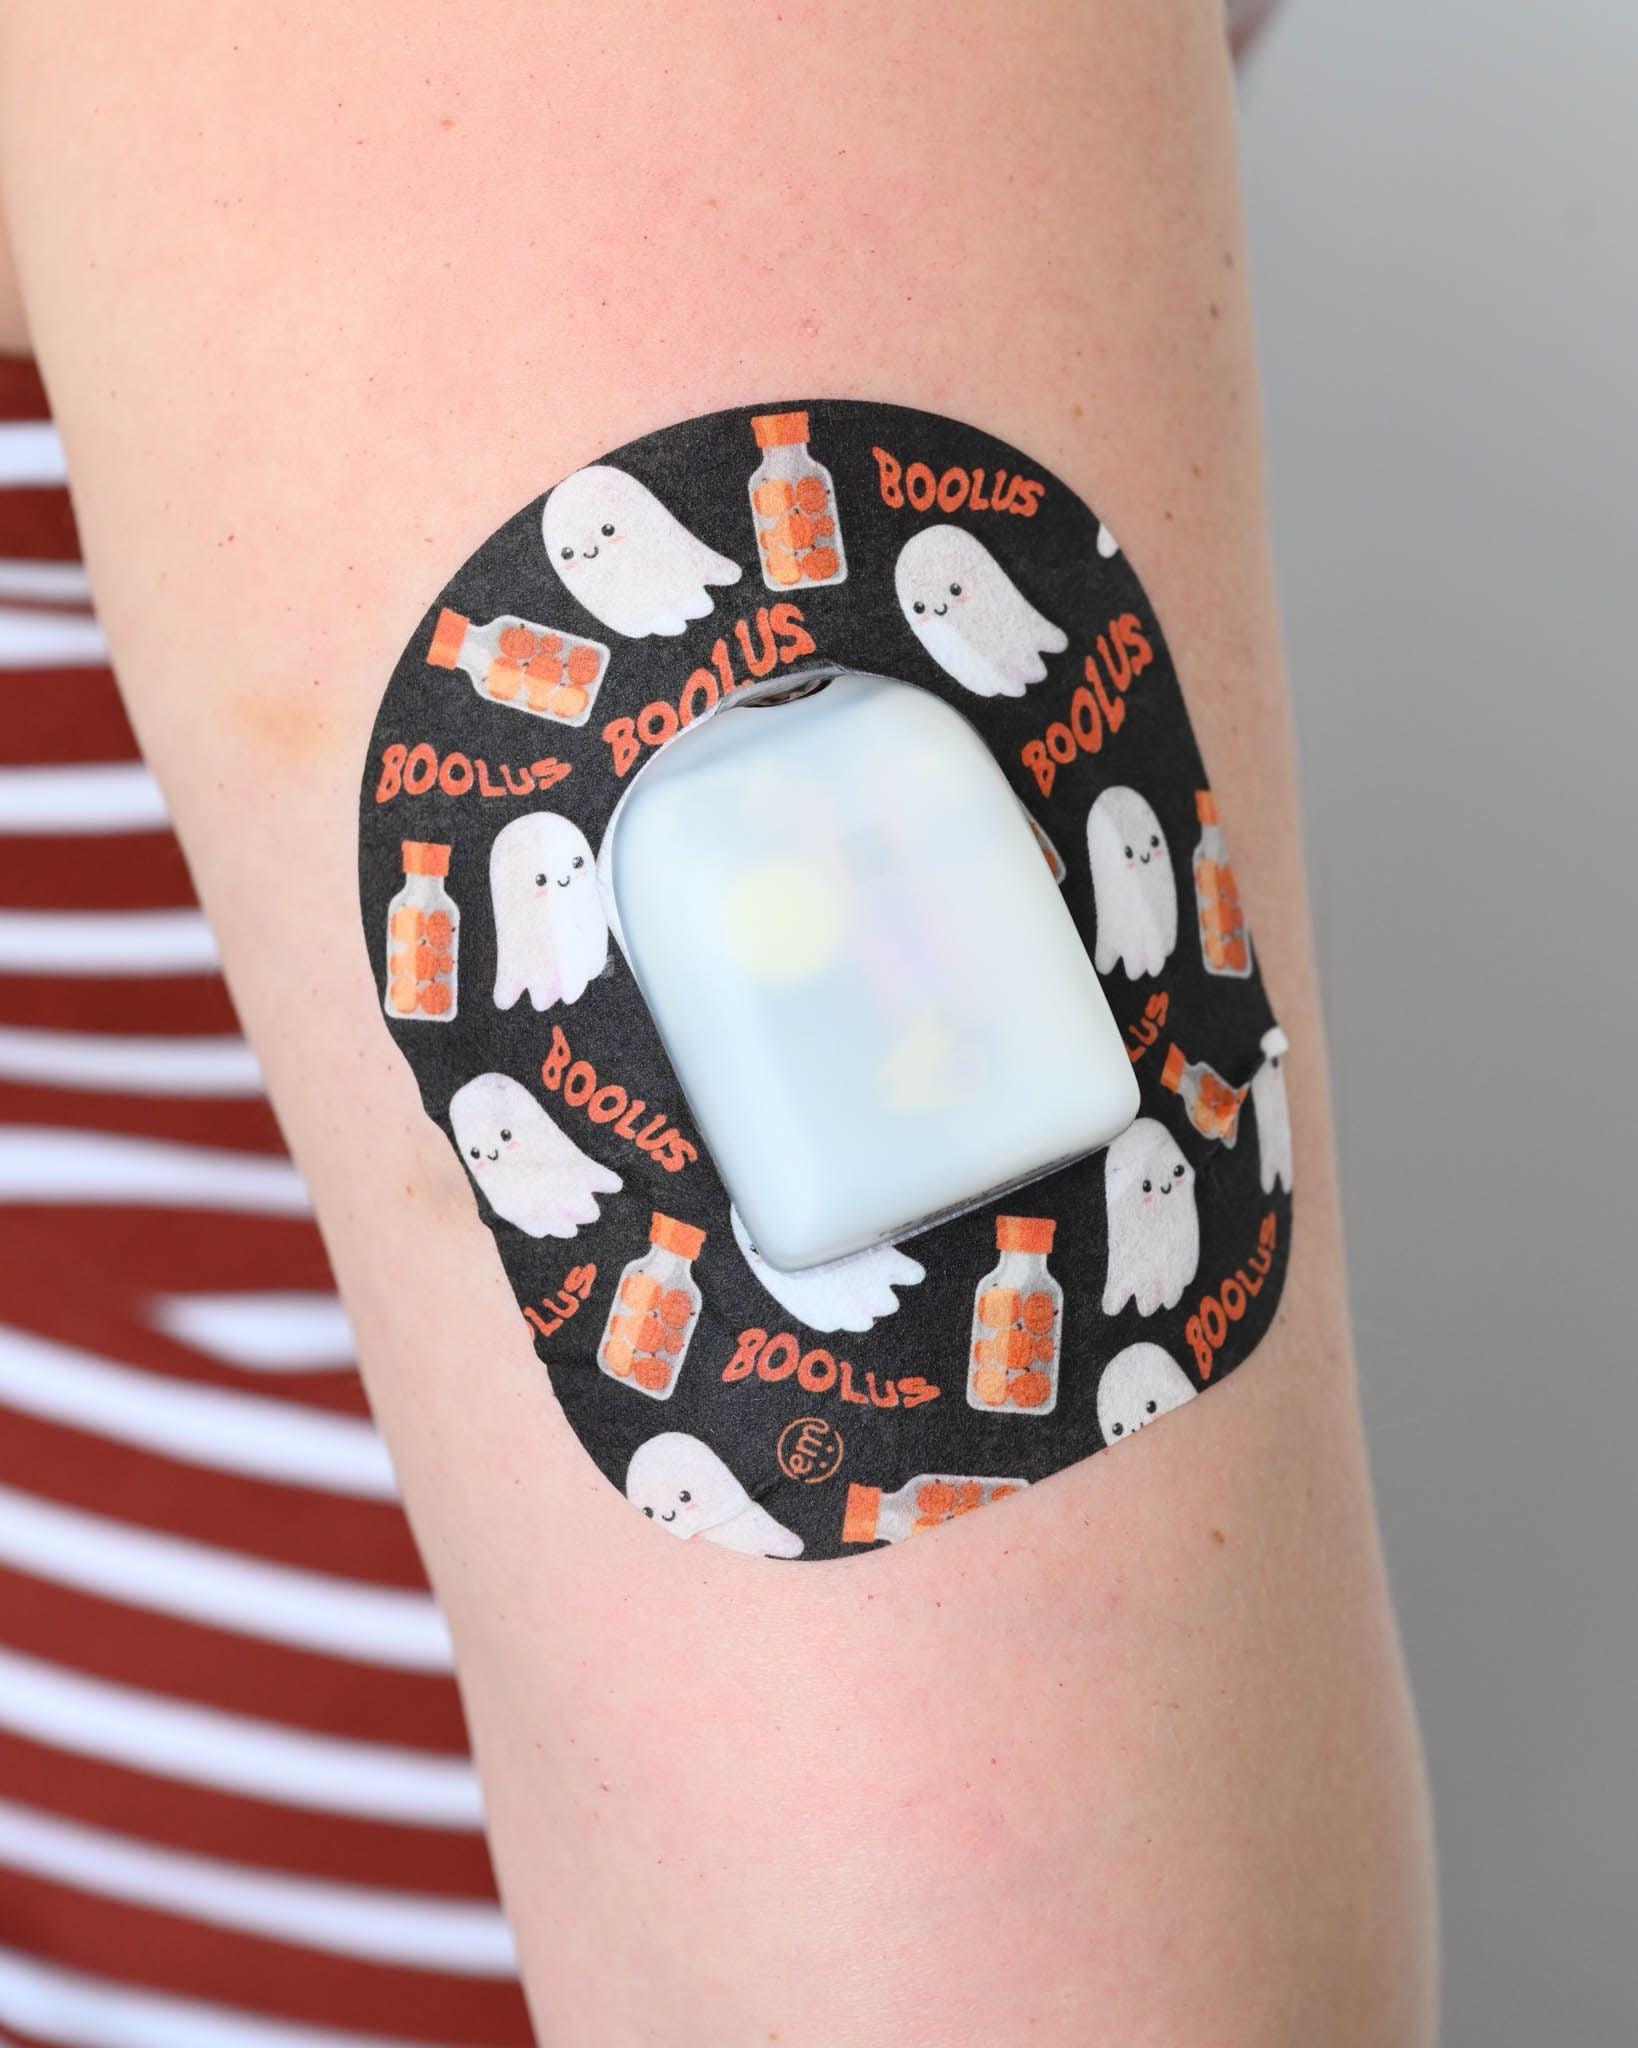 ExpressionMed, Trick or Treat Variety Pack Pod Tape, Single Tape, Bolus Insulin Bottles and Ghost Halloween Themed Omnipod Adhesive Patch Design on Human Arm 